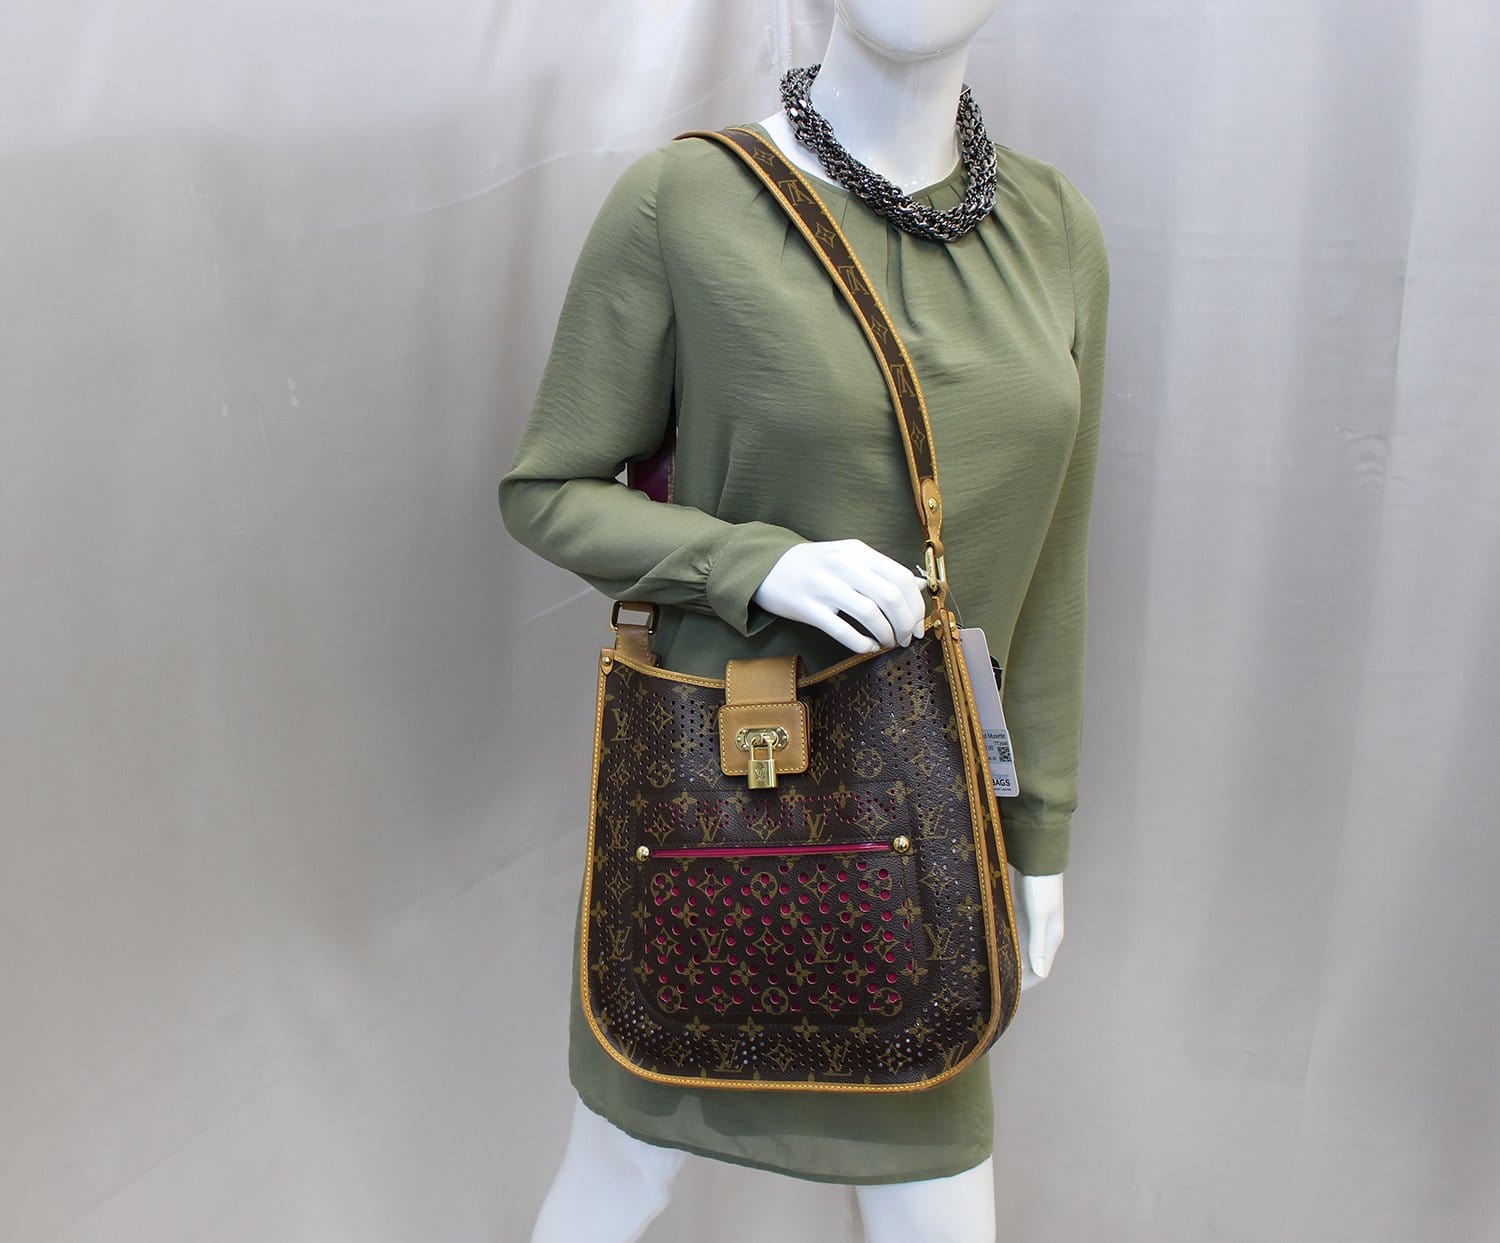 2006 Special Edition Louis Vuitton Perforated Speedy Bag